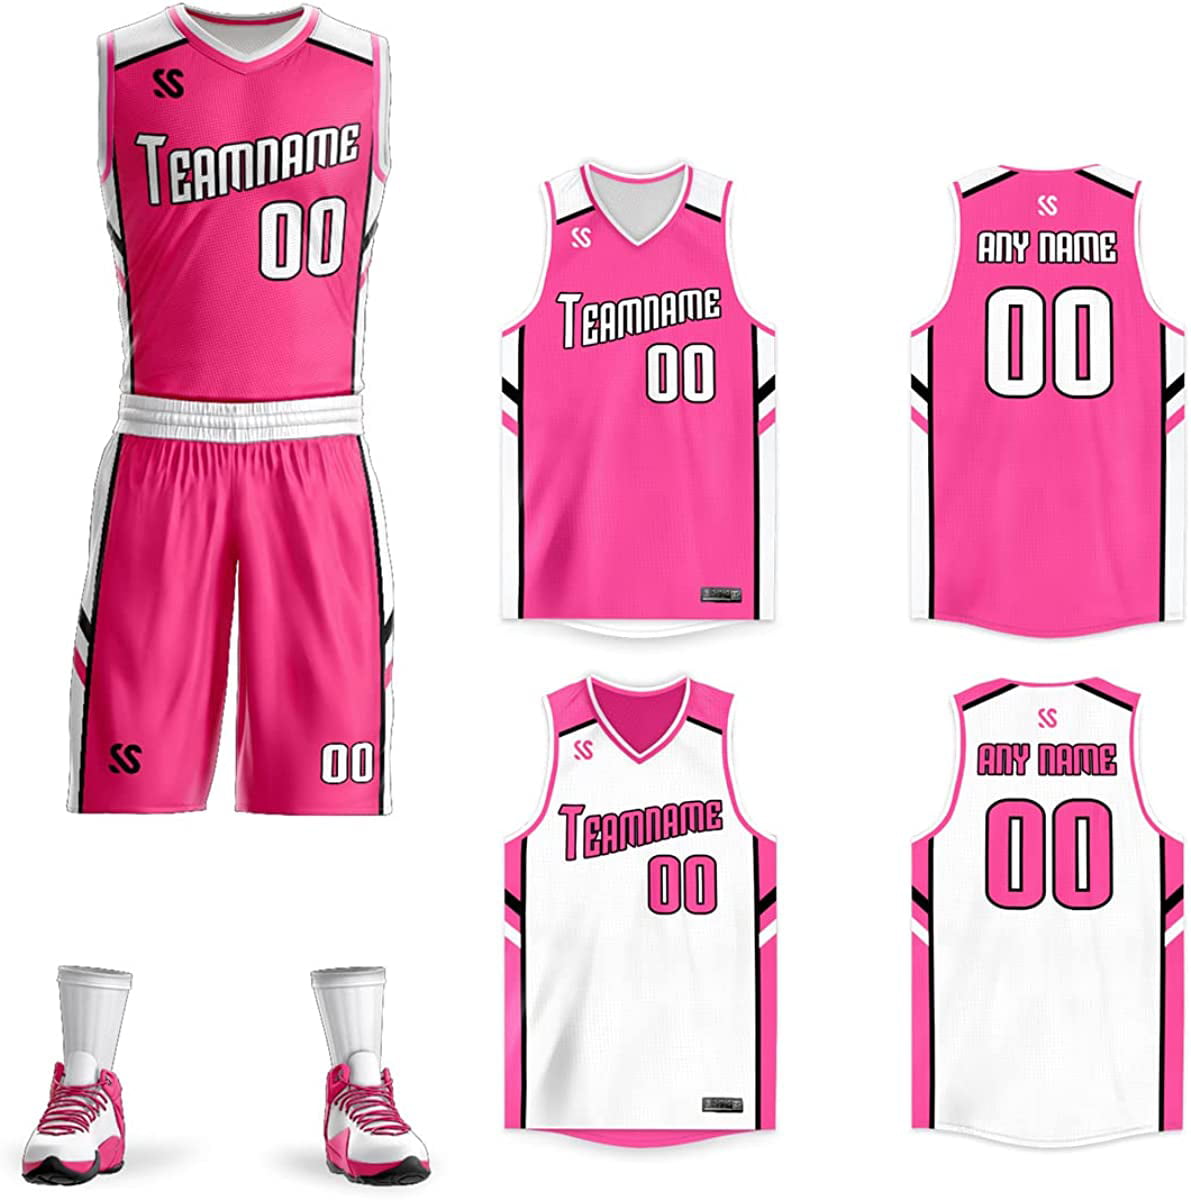 custom team basketball jerseys instock unifroms print with name and number  ,kids&men's basketball uniform 13